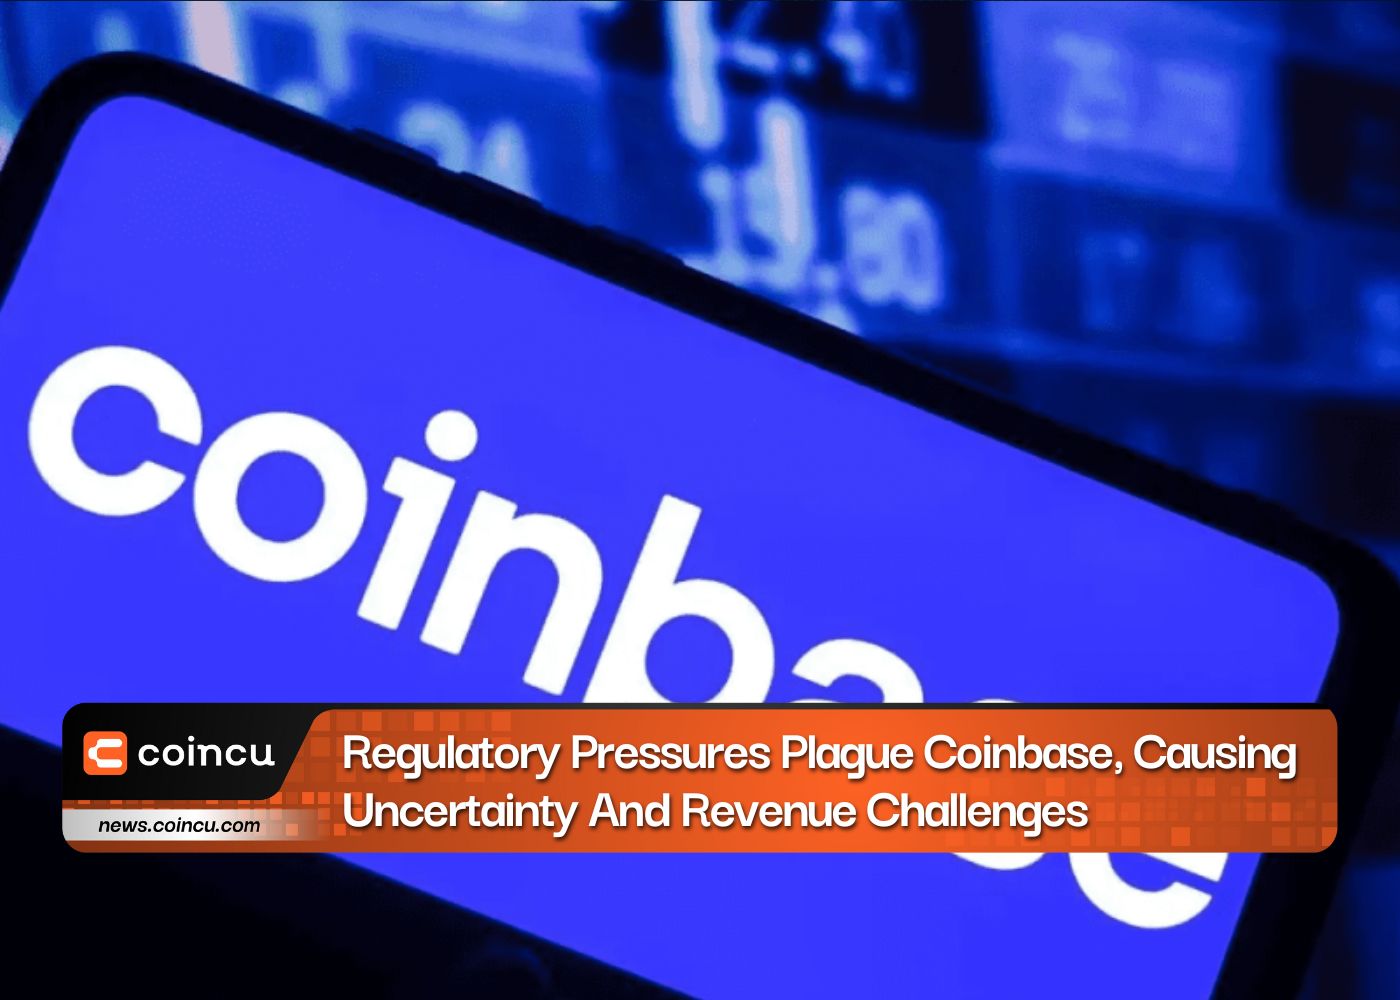 Regulatory Pressures Plague Coinbase, Causing Uncertainty And Revenue Challenges